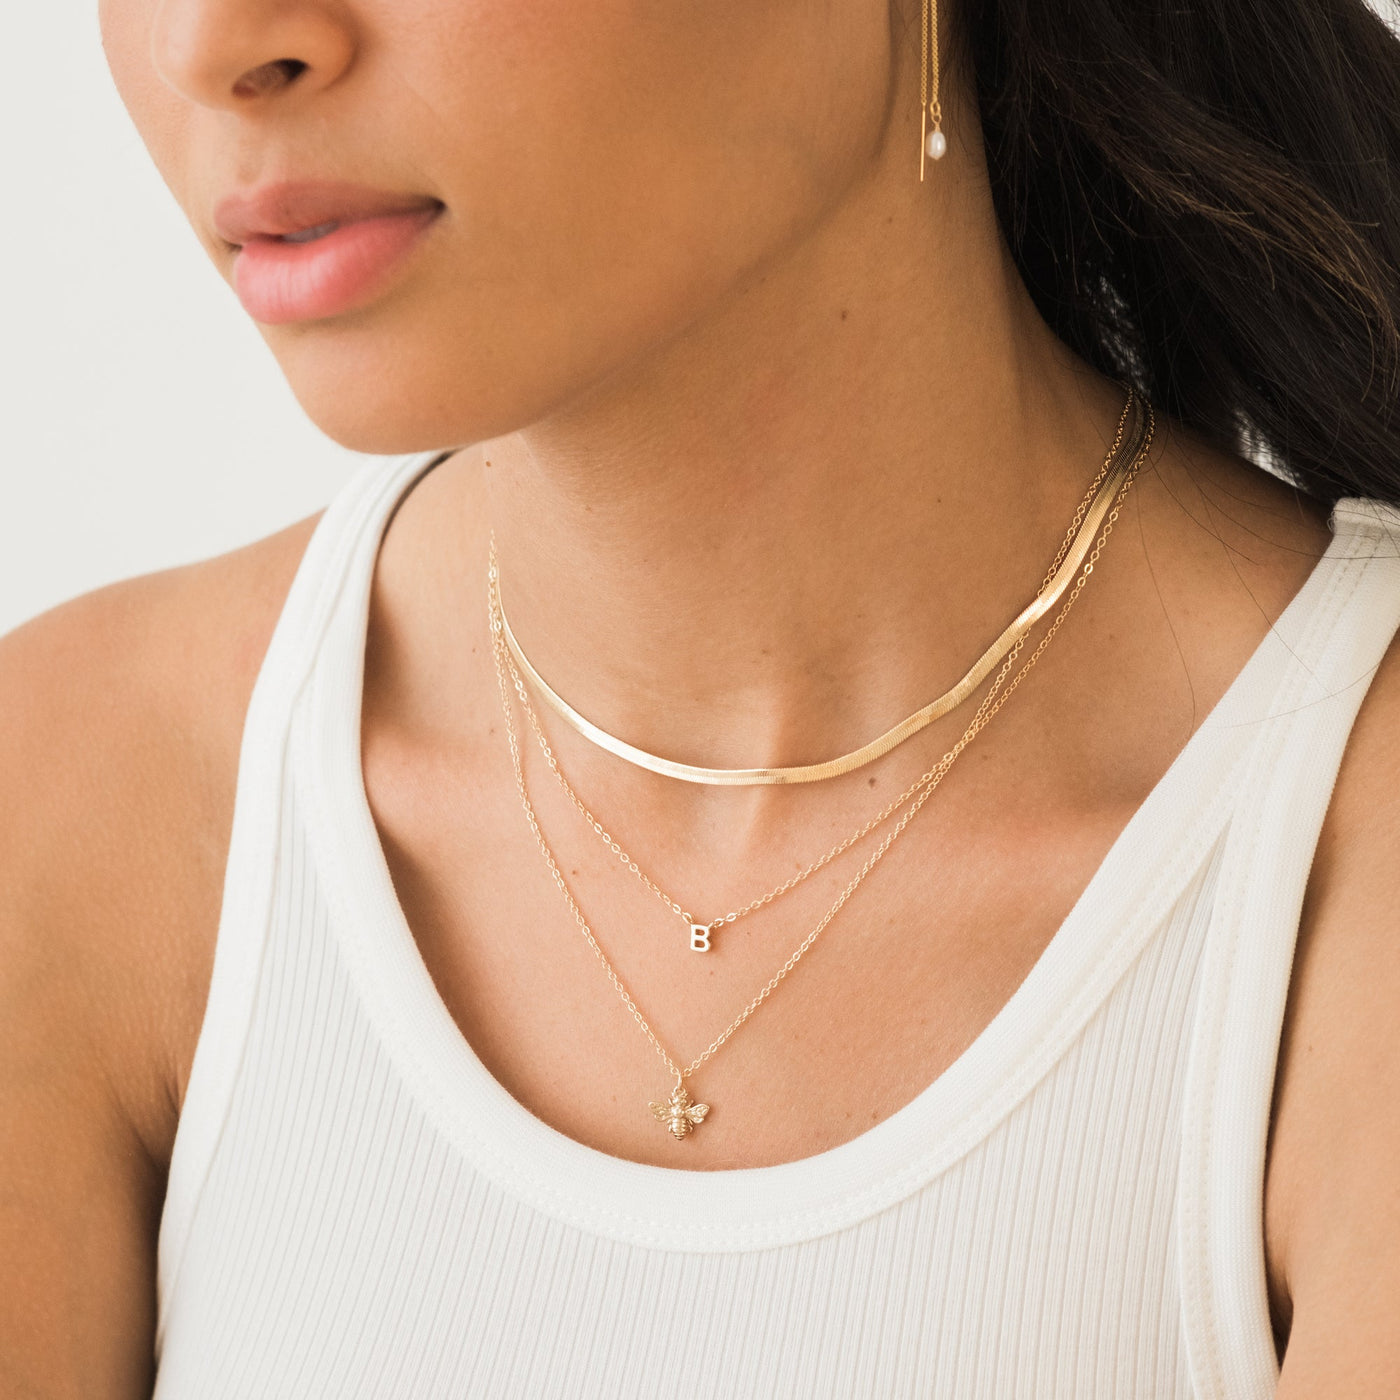 Gold Herringbone Necklace for Women, Dainty Gold Necklace 14k Gold